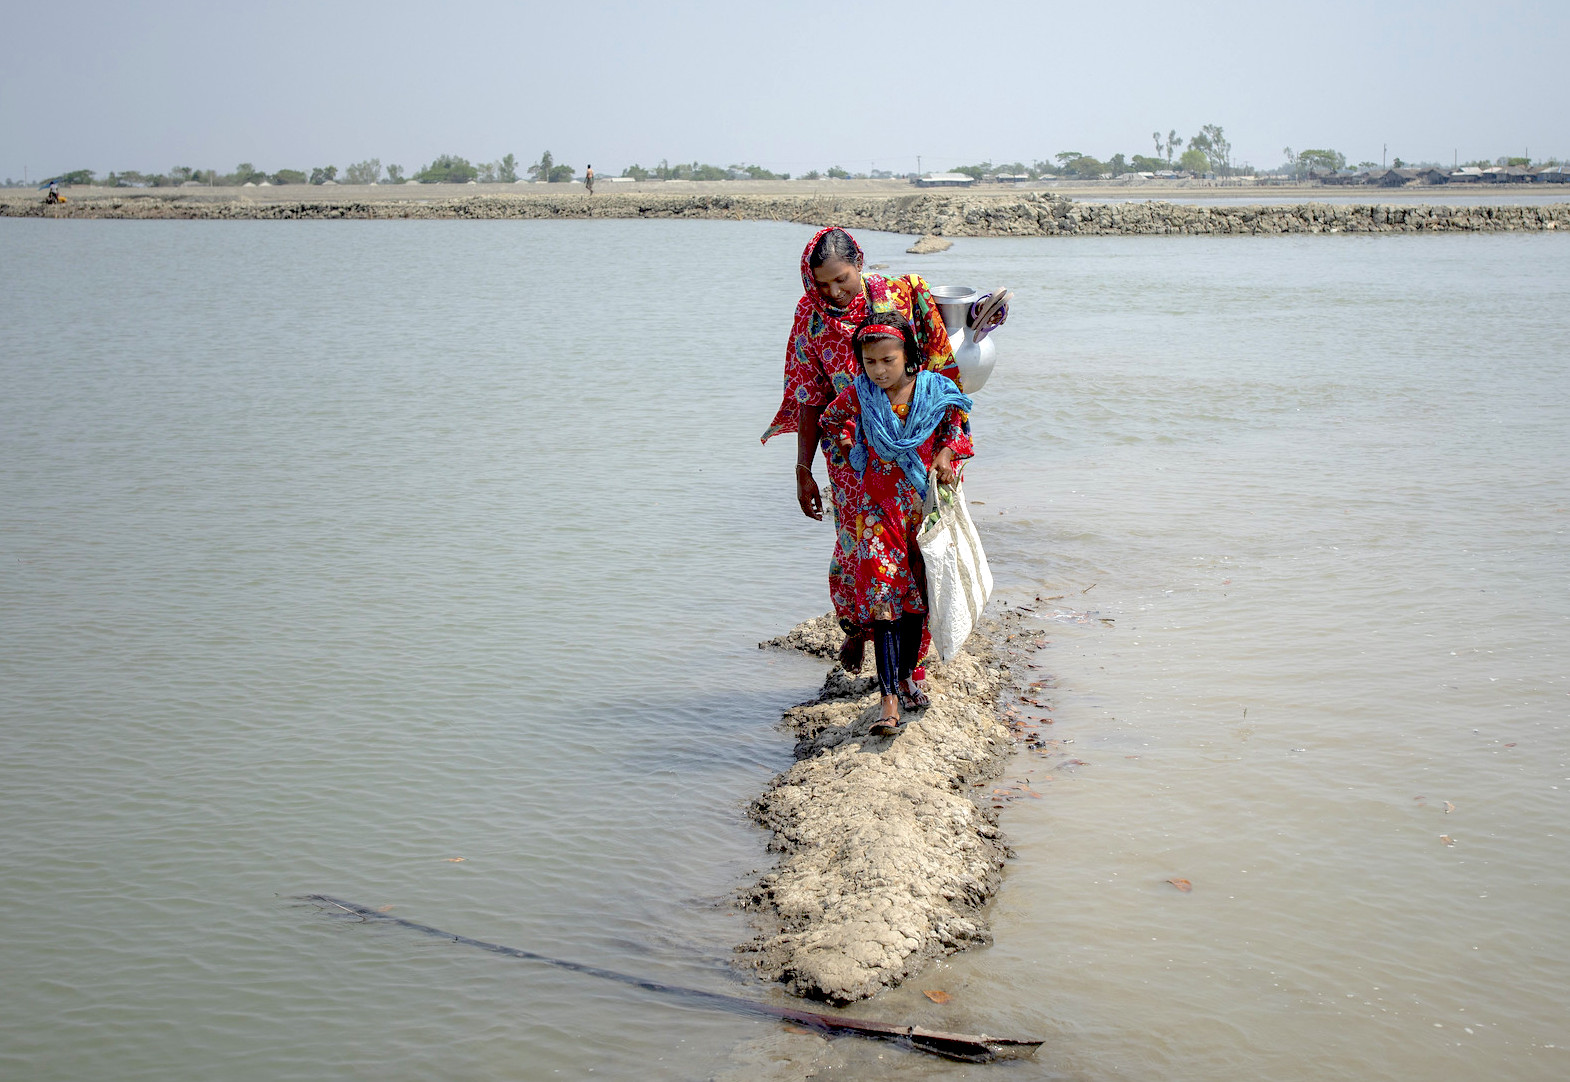  People living in the southern coastal region of the Sundarbans in Bangladesh suffer from a water shortage in the dry season as a result of increasing salinity in the groundwater, and of the river Satkhira, caused by rising sea levels. Image via Flickr by International monetary fund. CC BY NC-ND 2.0